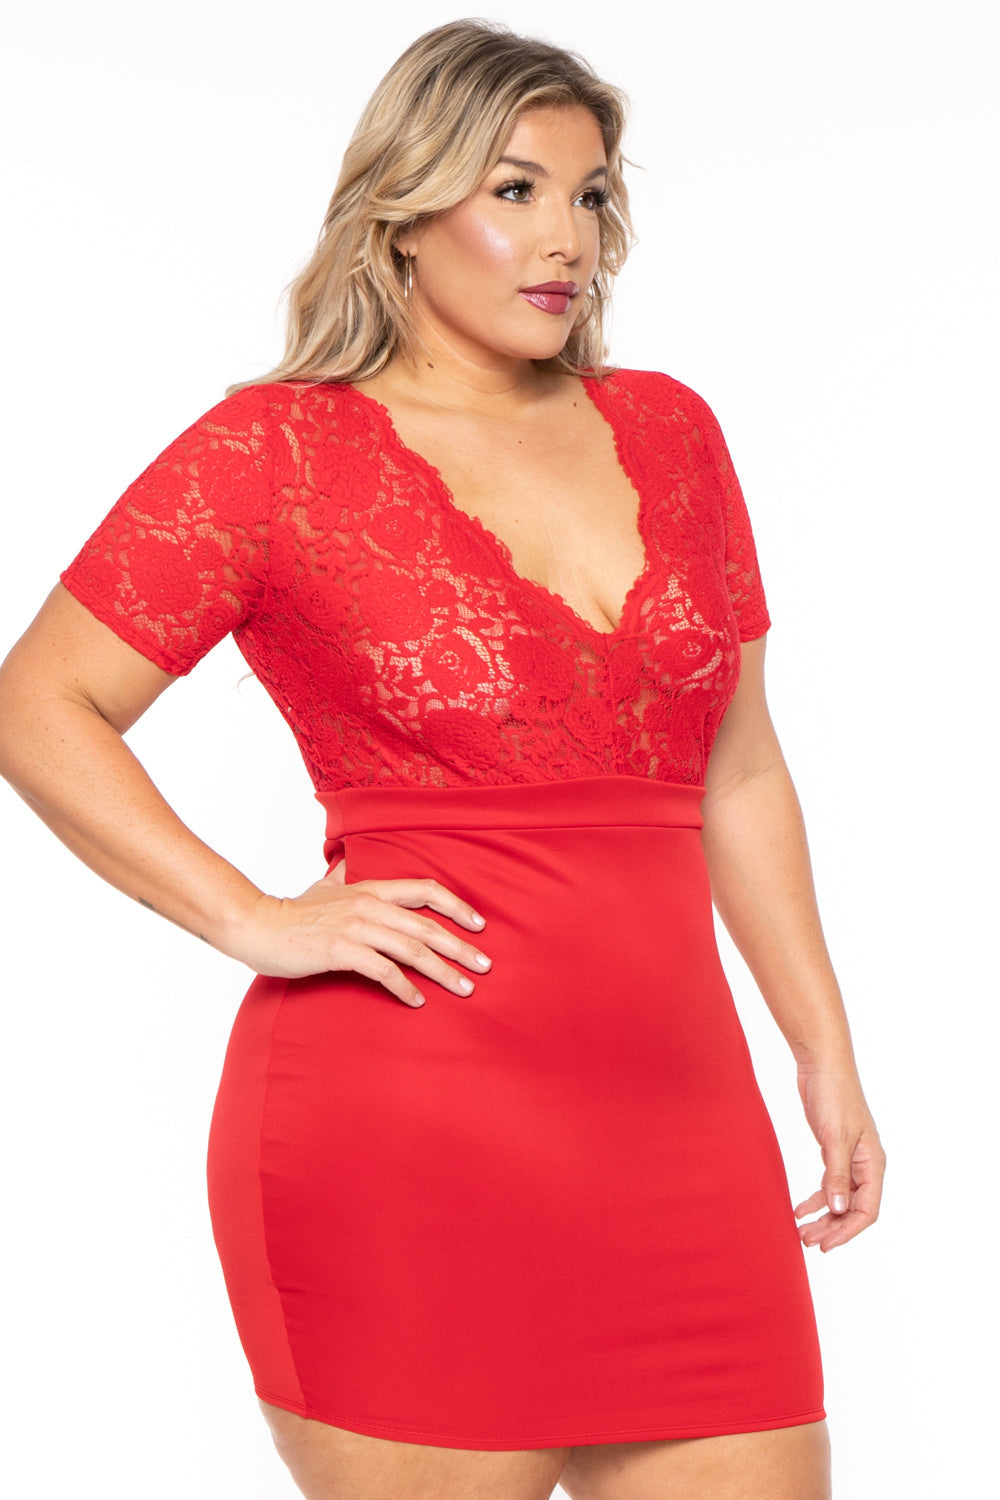 Curvy Sense - ❤❤❤ Red Hot. @cocoalicious32 is one hot Mama in the  ASYMMETRIC ONE SHOULDER DRESS. 40% off sitewide with discount code BASH40.  #curvysensedoll #curvysense